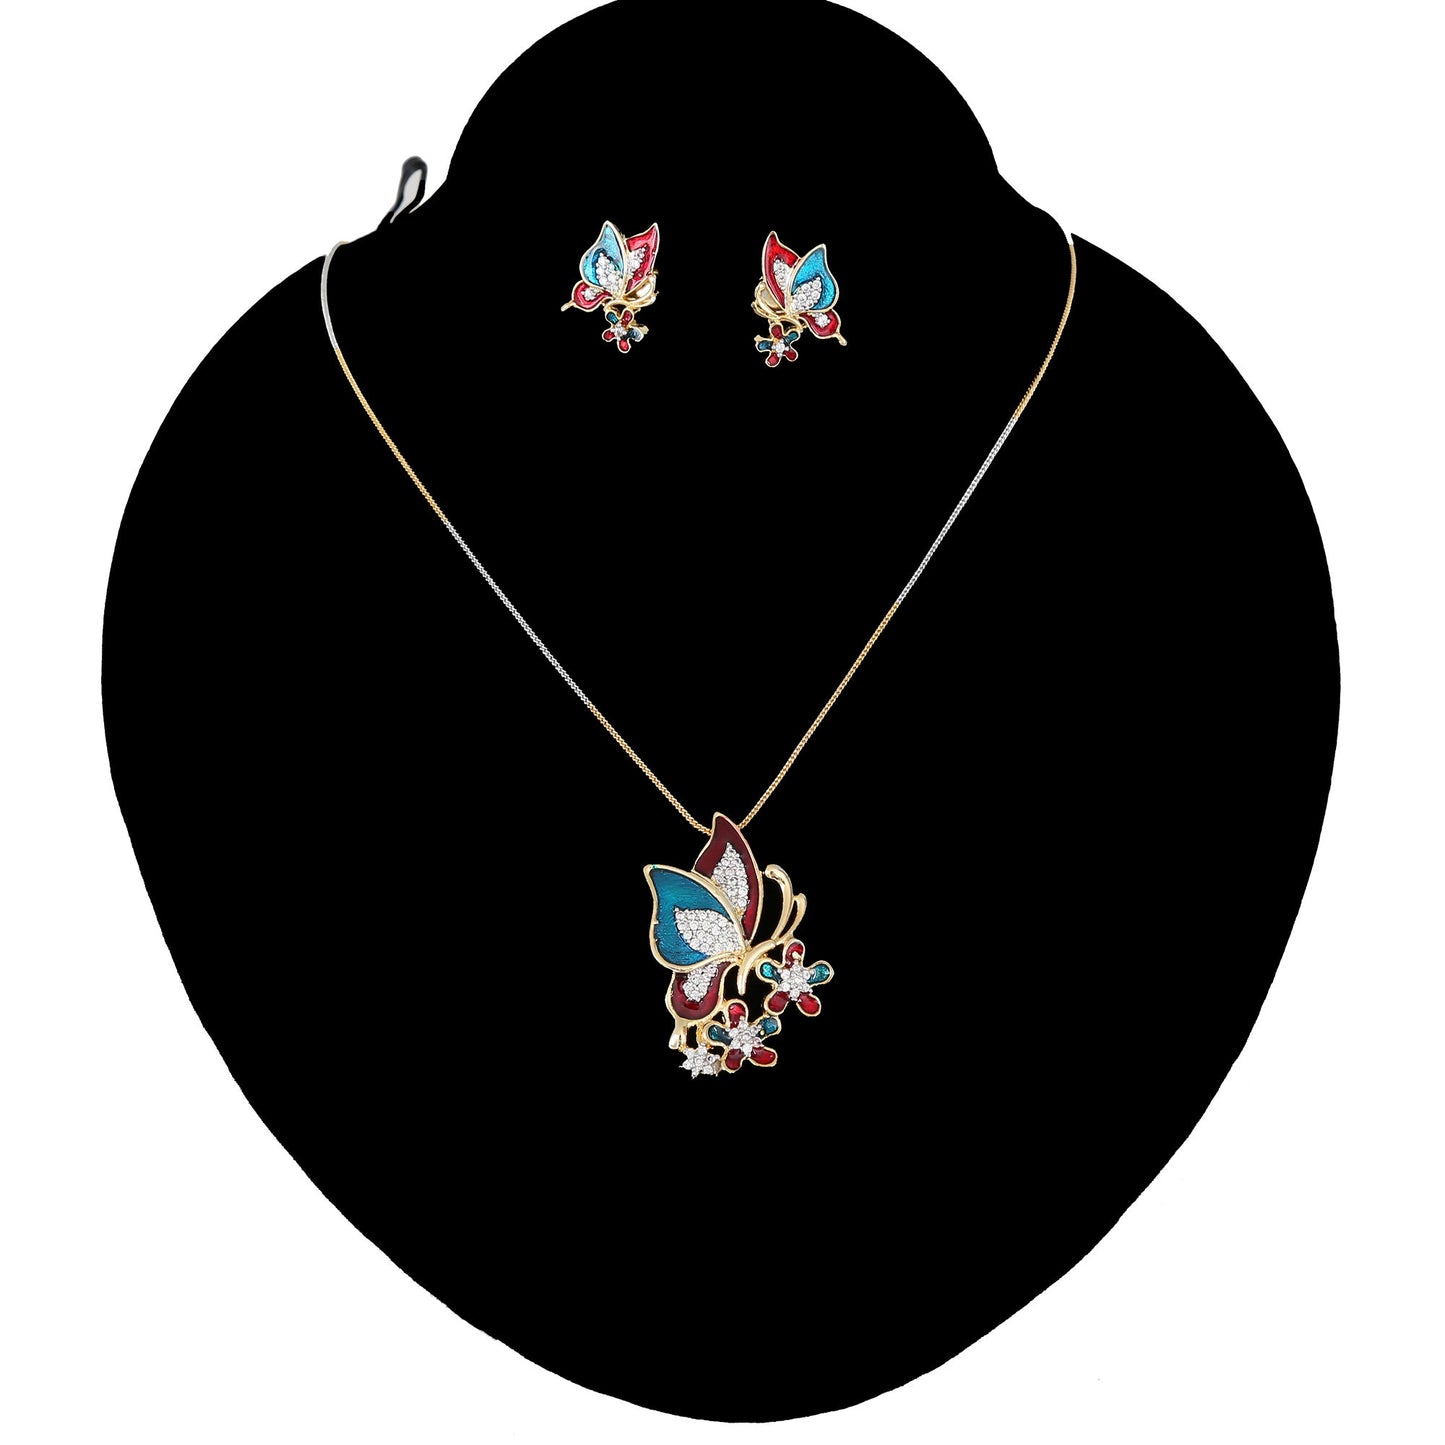 My Daily Use gold tone Dancing butterfly pendant earring set |New Fashion Butterfly Crystal Jewelry|CZ butterfly fashion women necklace